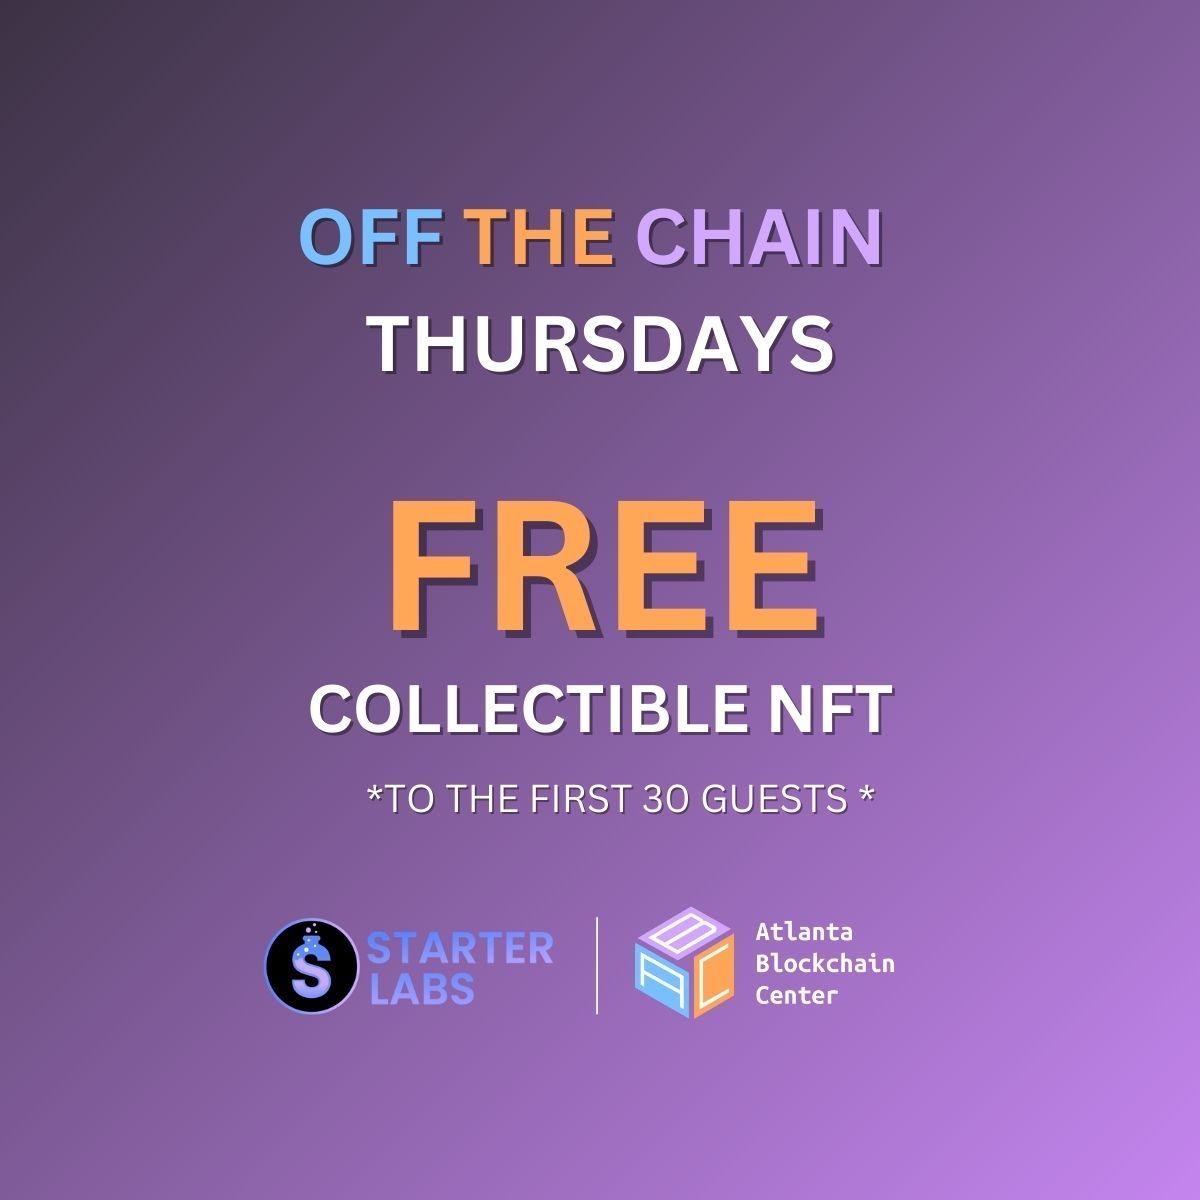 Join us tonight for Off The Chain Thursday to discuss the Bitcoin halving. The first 30 guests will receive a collectible NFT. Collect more for rewards. #BitcoinHalving2024 #10in5